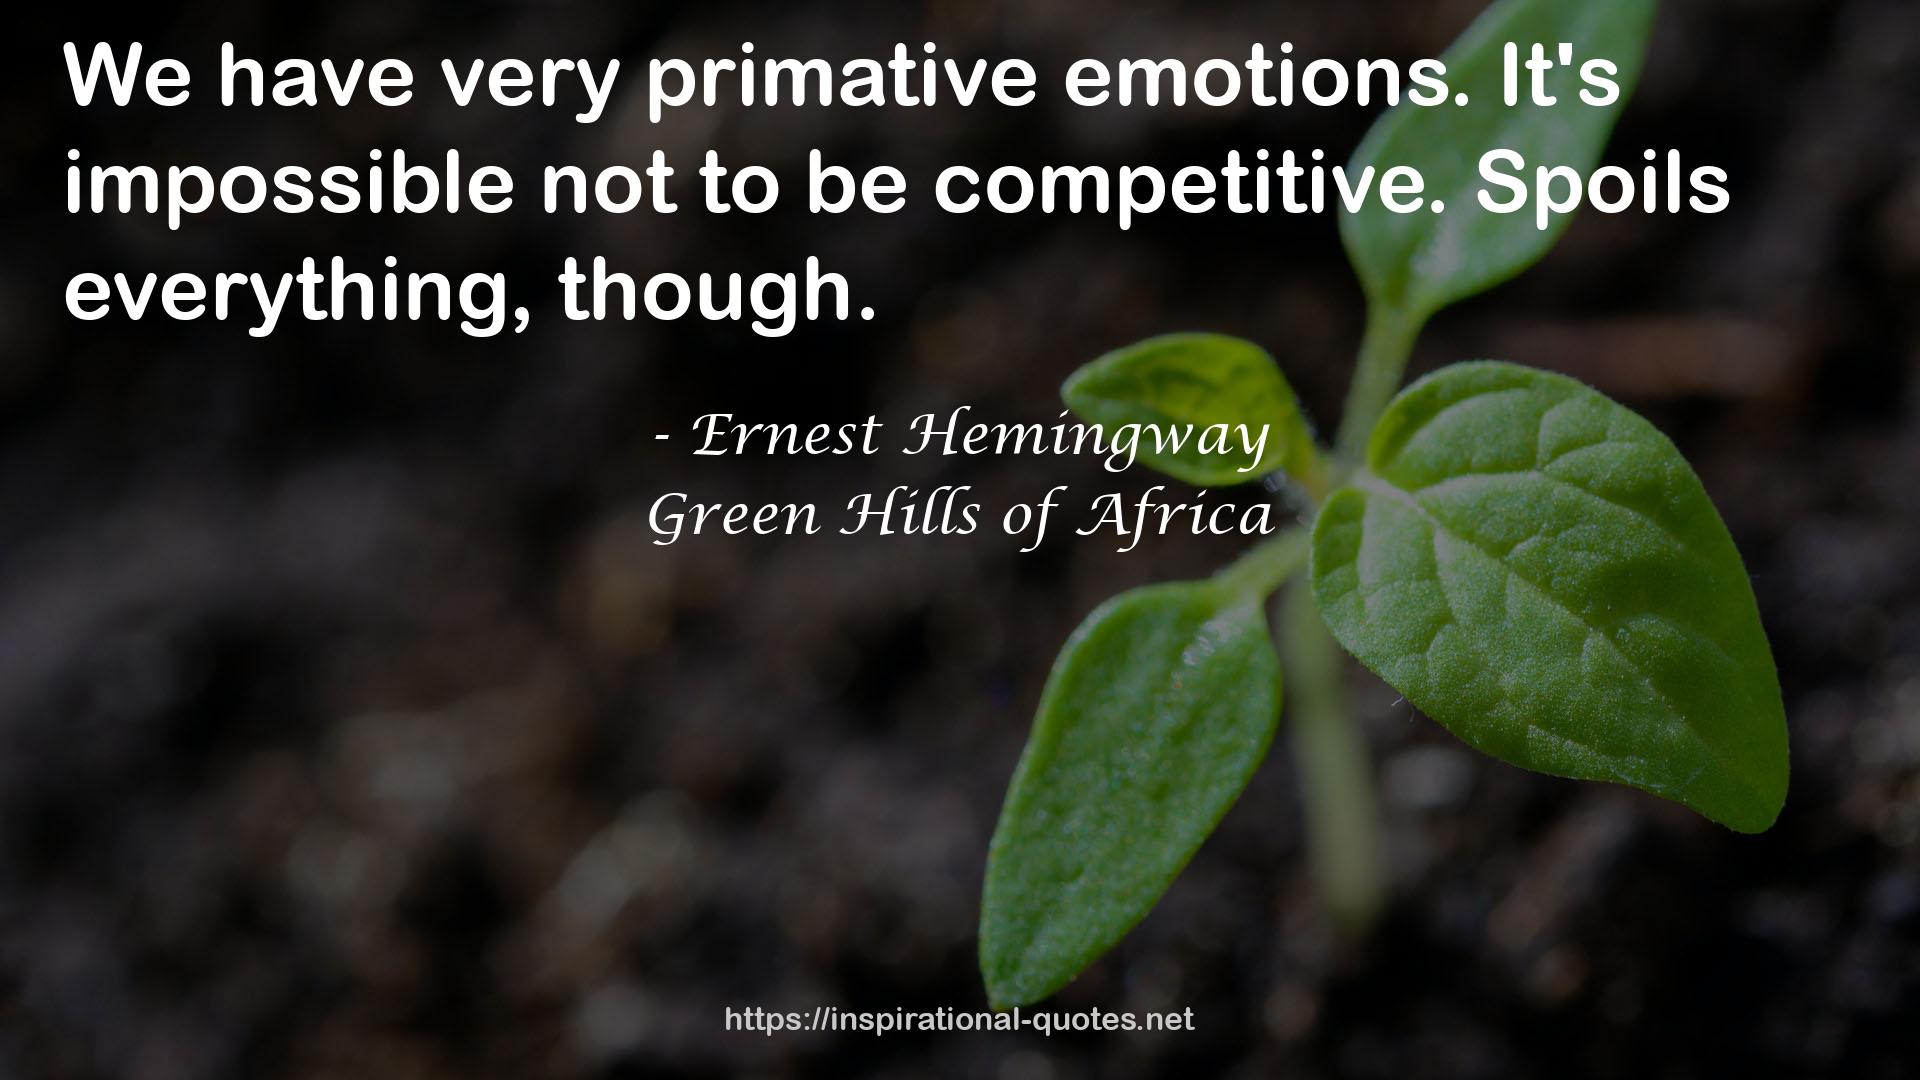 Green Hills of Africa QUOTES